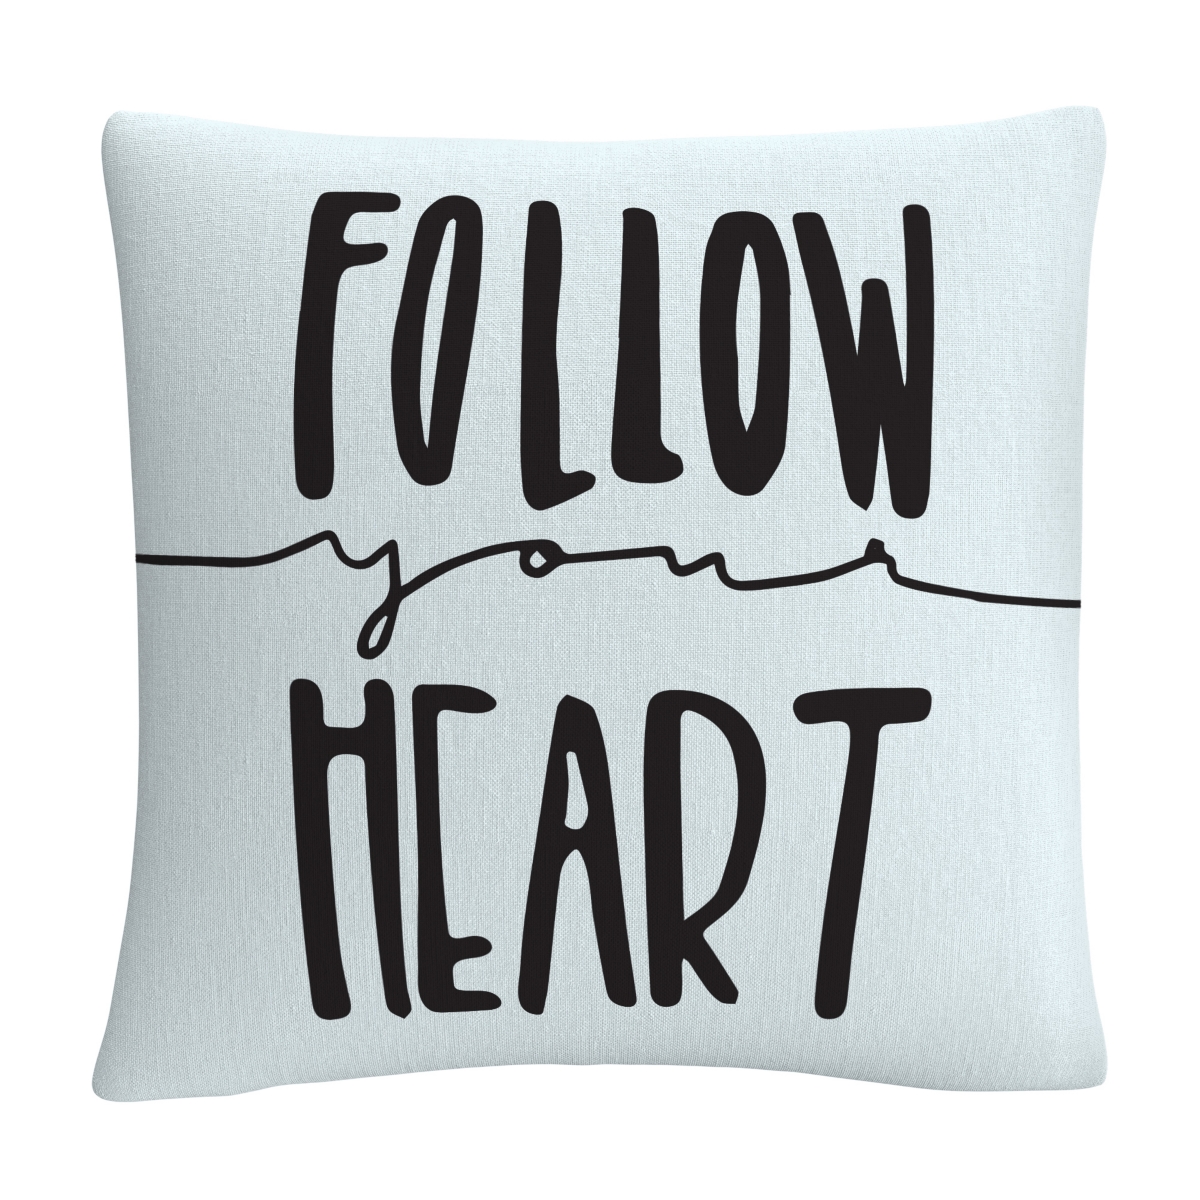 Abc Typographic Follow Your Heart Decorative Pillow, 16 x 16